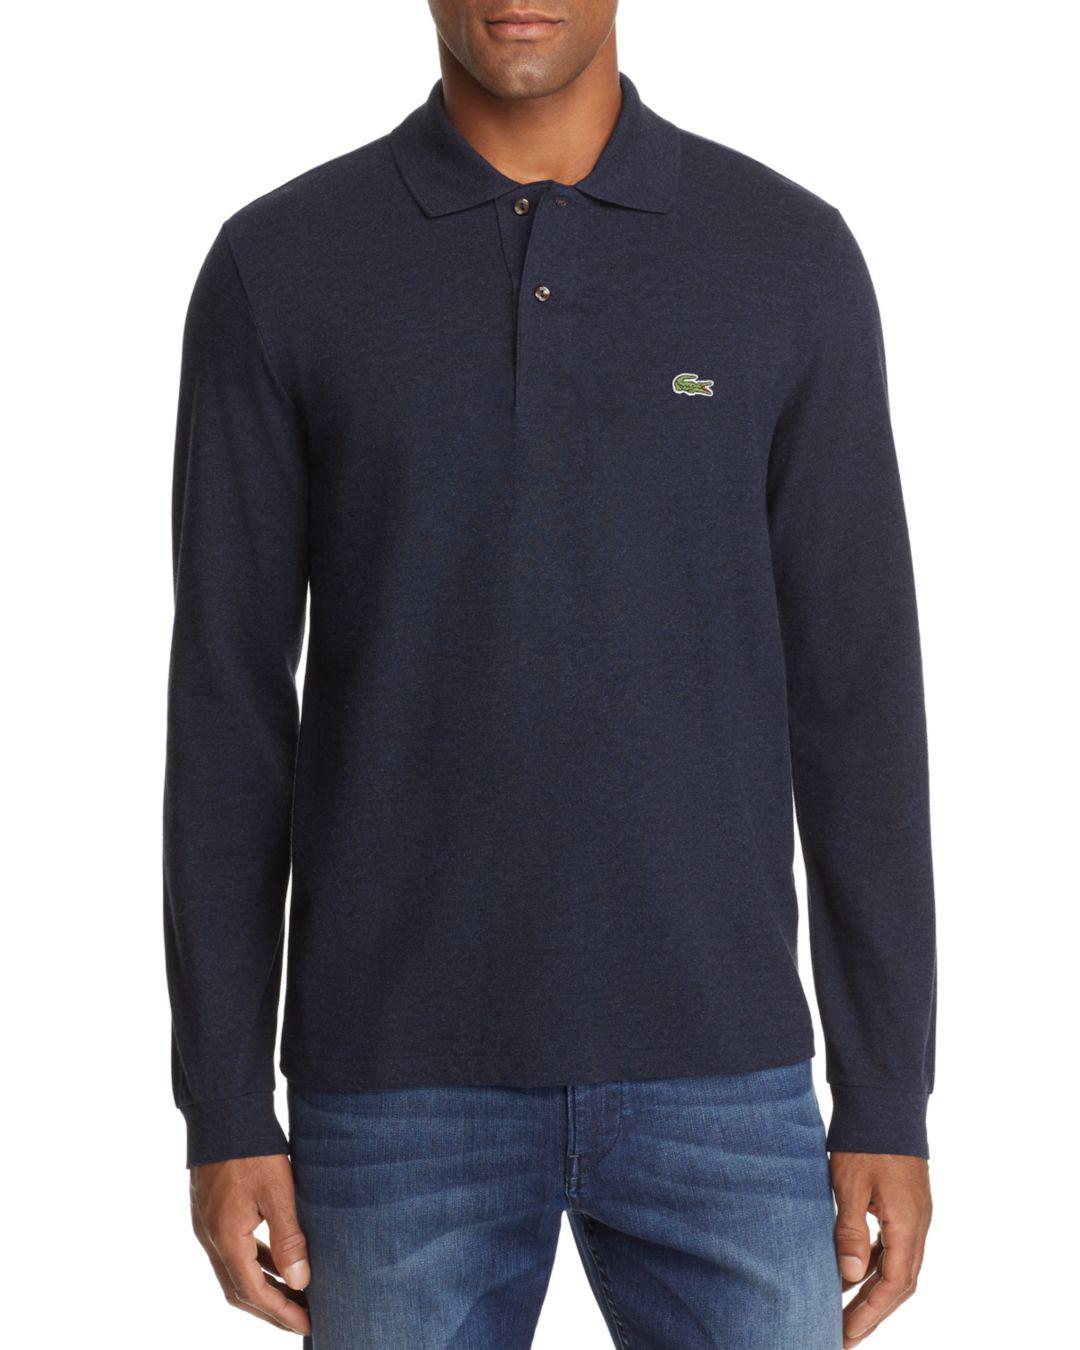 Lyst - Lacoste Long Sleeve Polo Shirt in Blue for Men - Save 48. ...